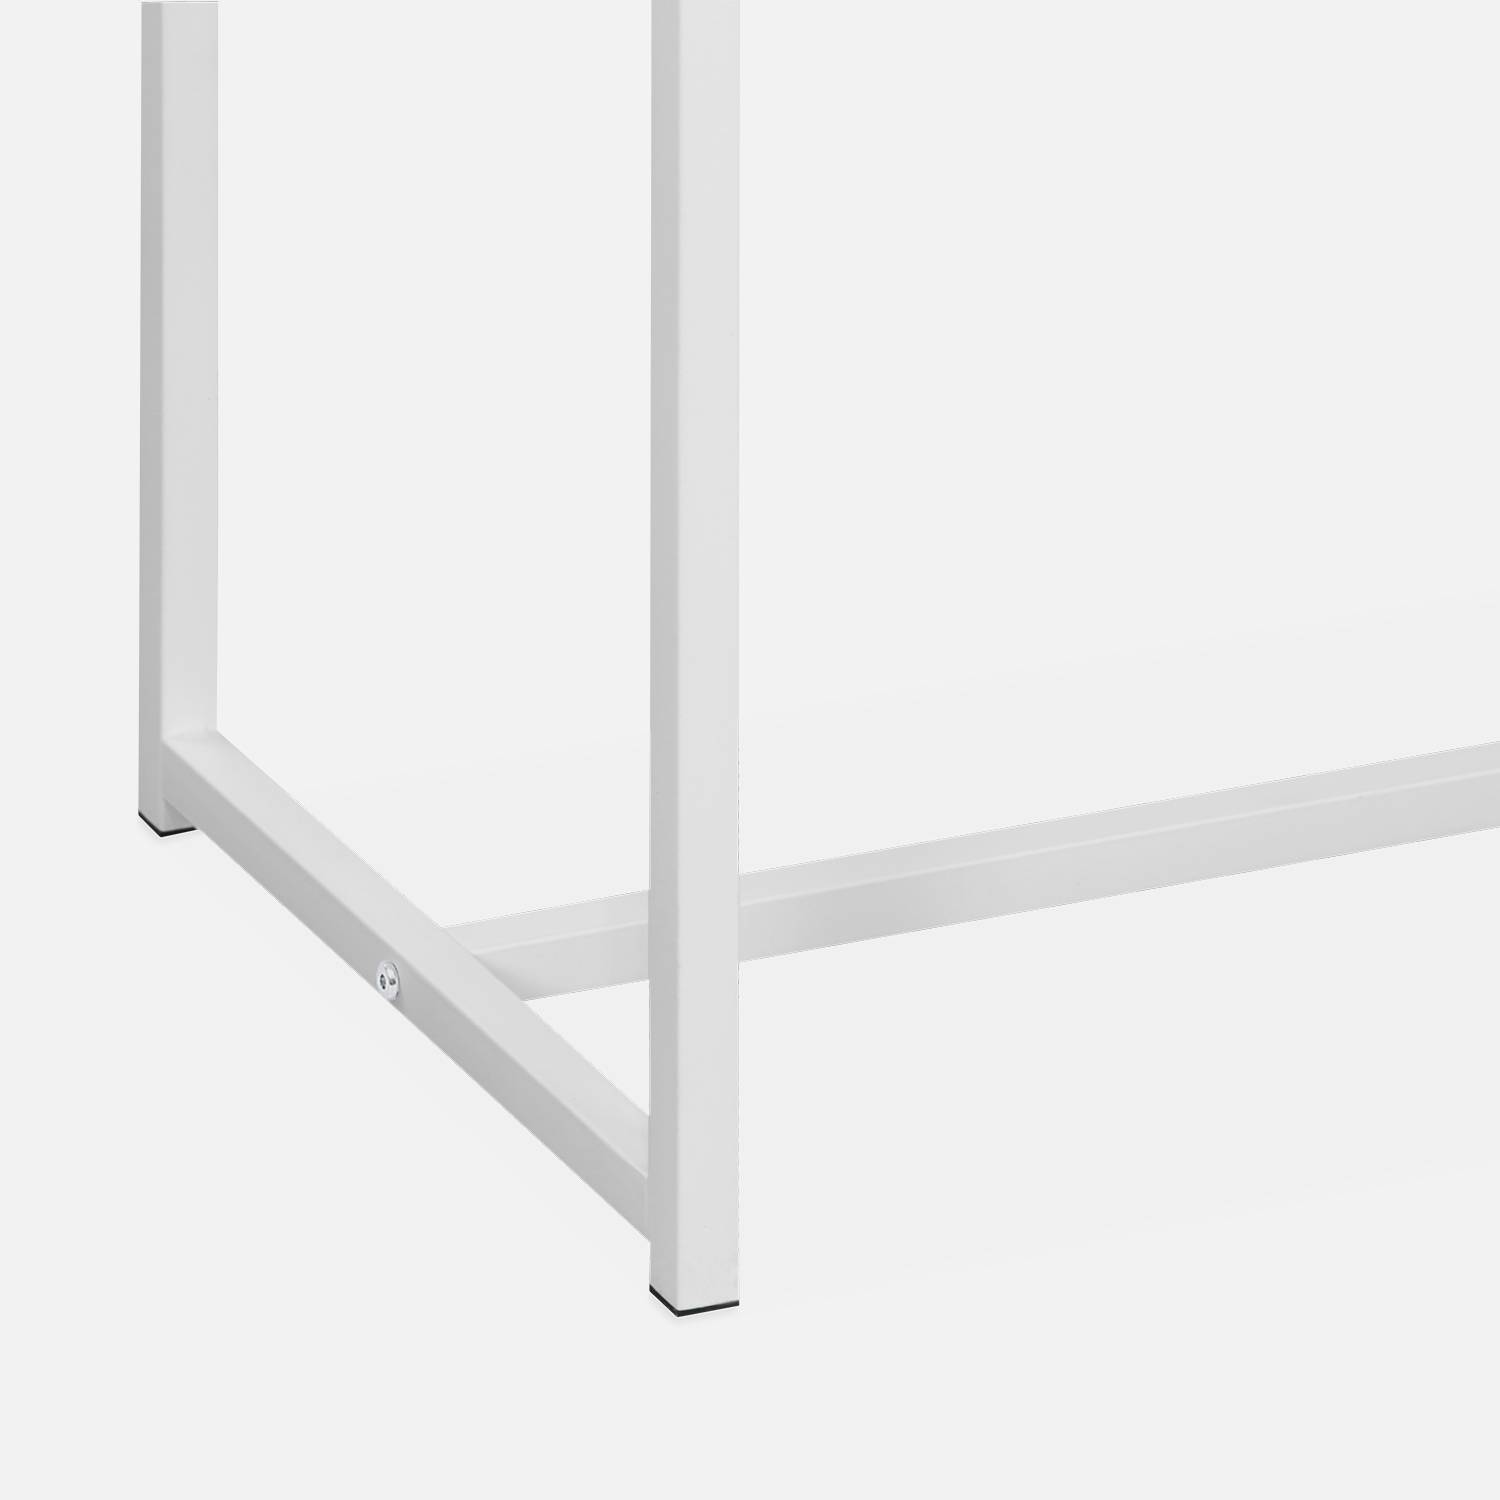 Metal and wood-style hallway console table with industrial metal legs 120cm - Loft - White Photo4